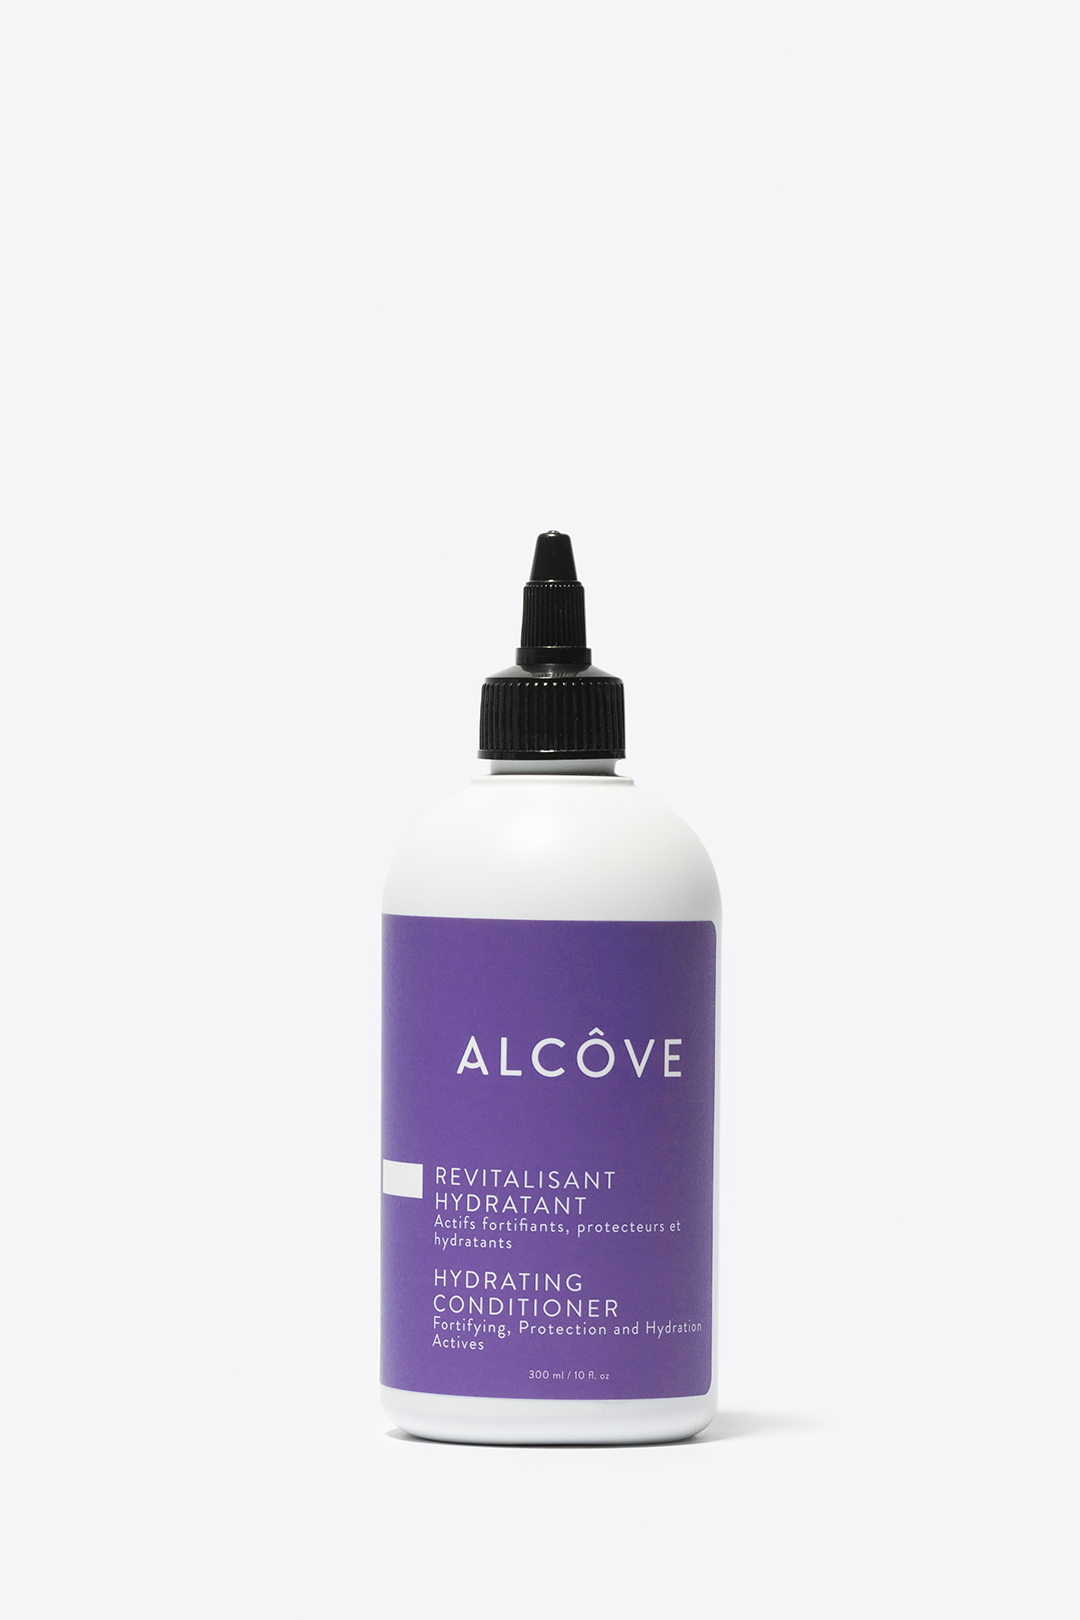 Alcove - HYDRATING CONDITIONER - by Alcove |ProCare Outlet|